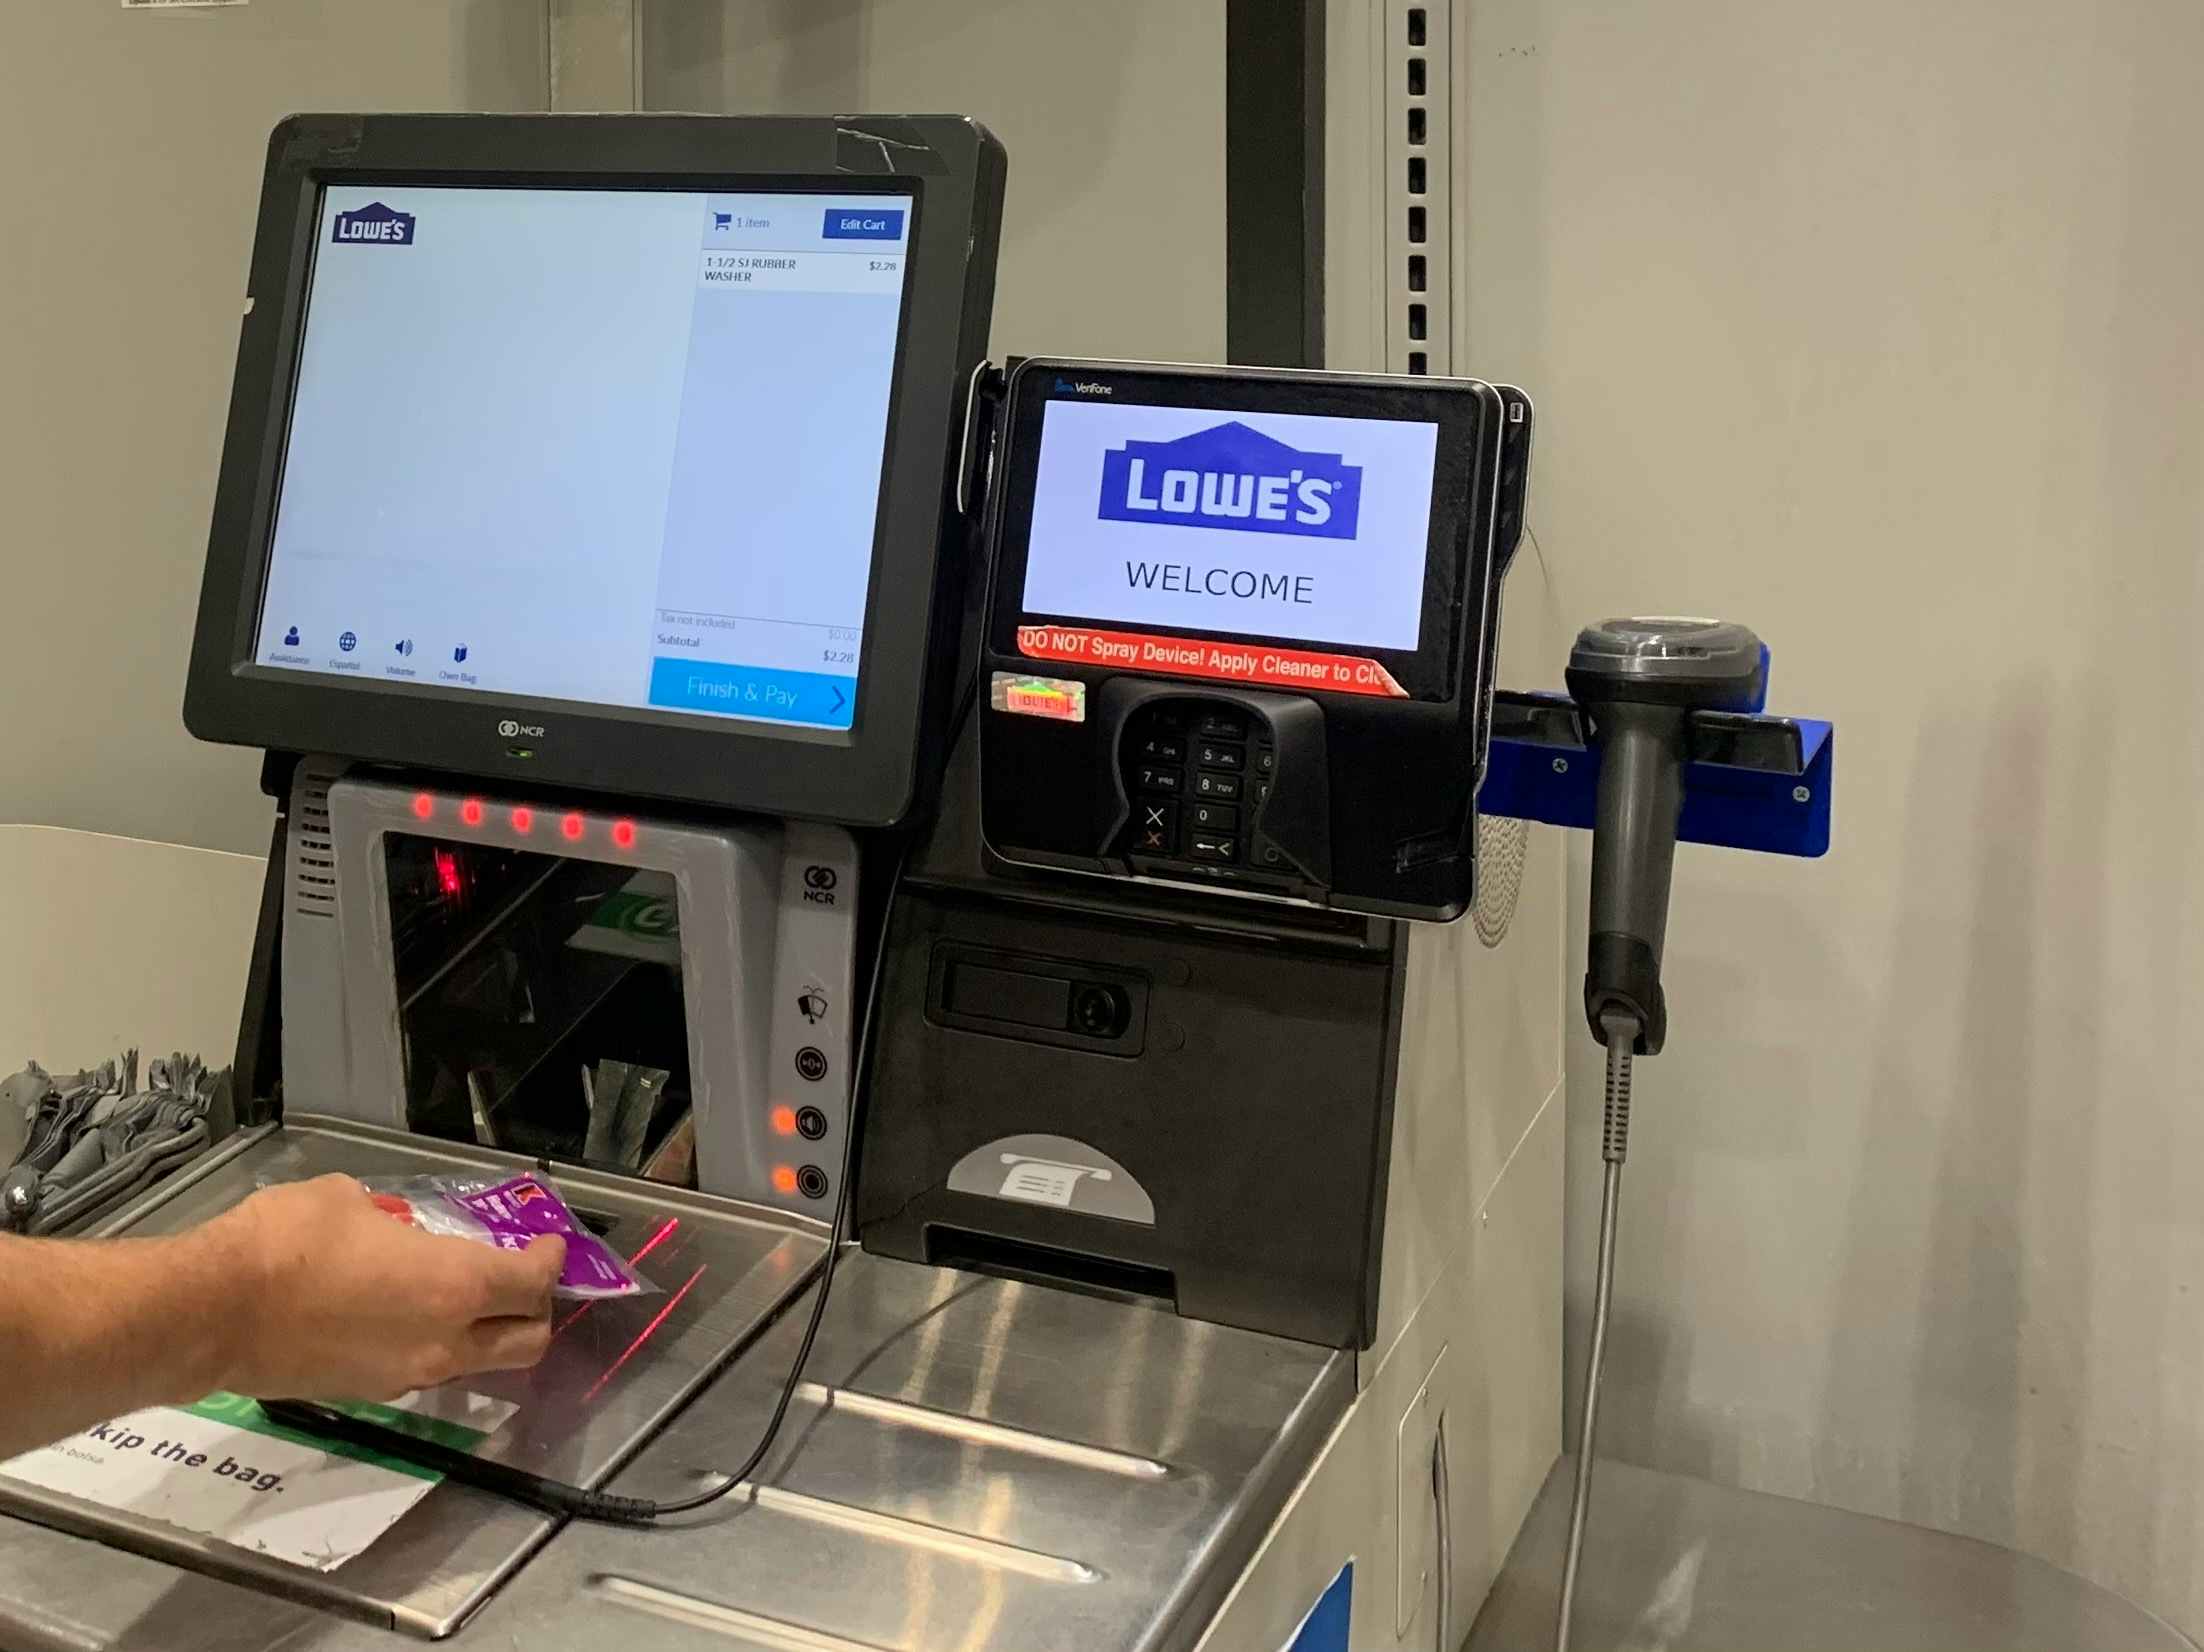 A person scanning an item at the Lowe's self checkout scanner.